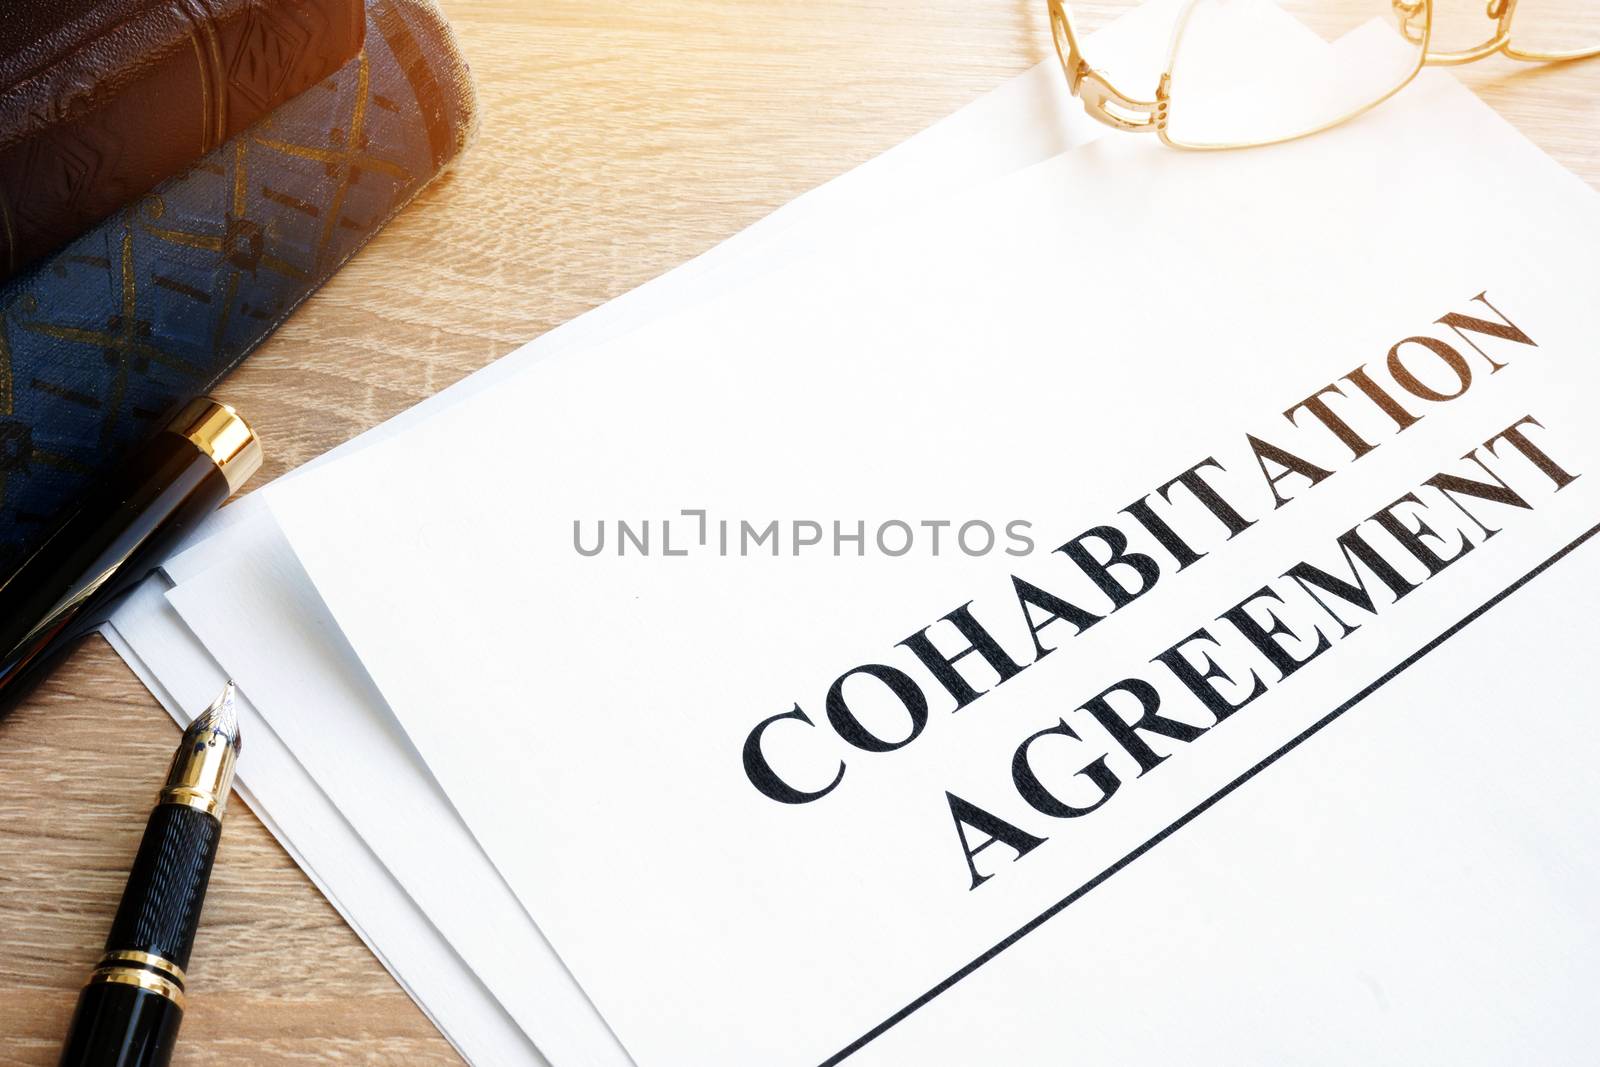 Cohabitation Agreement and books on a table. by designer491